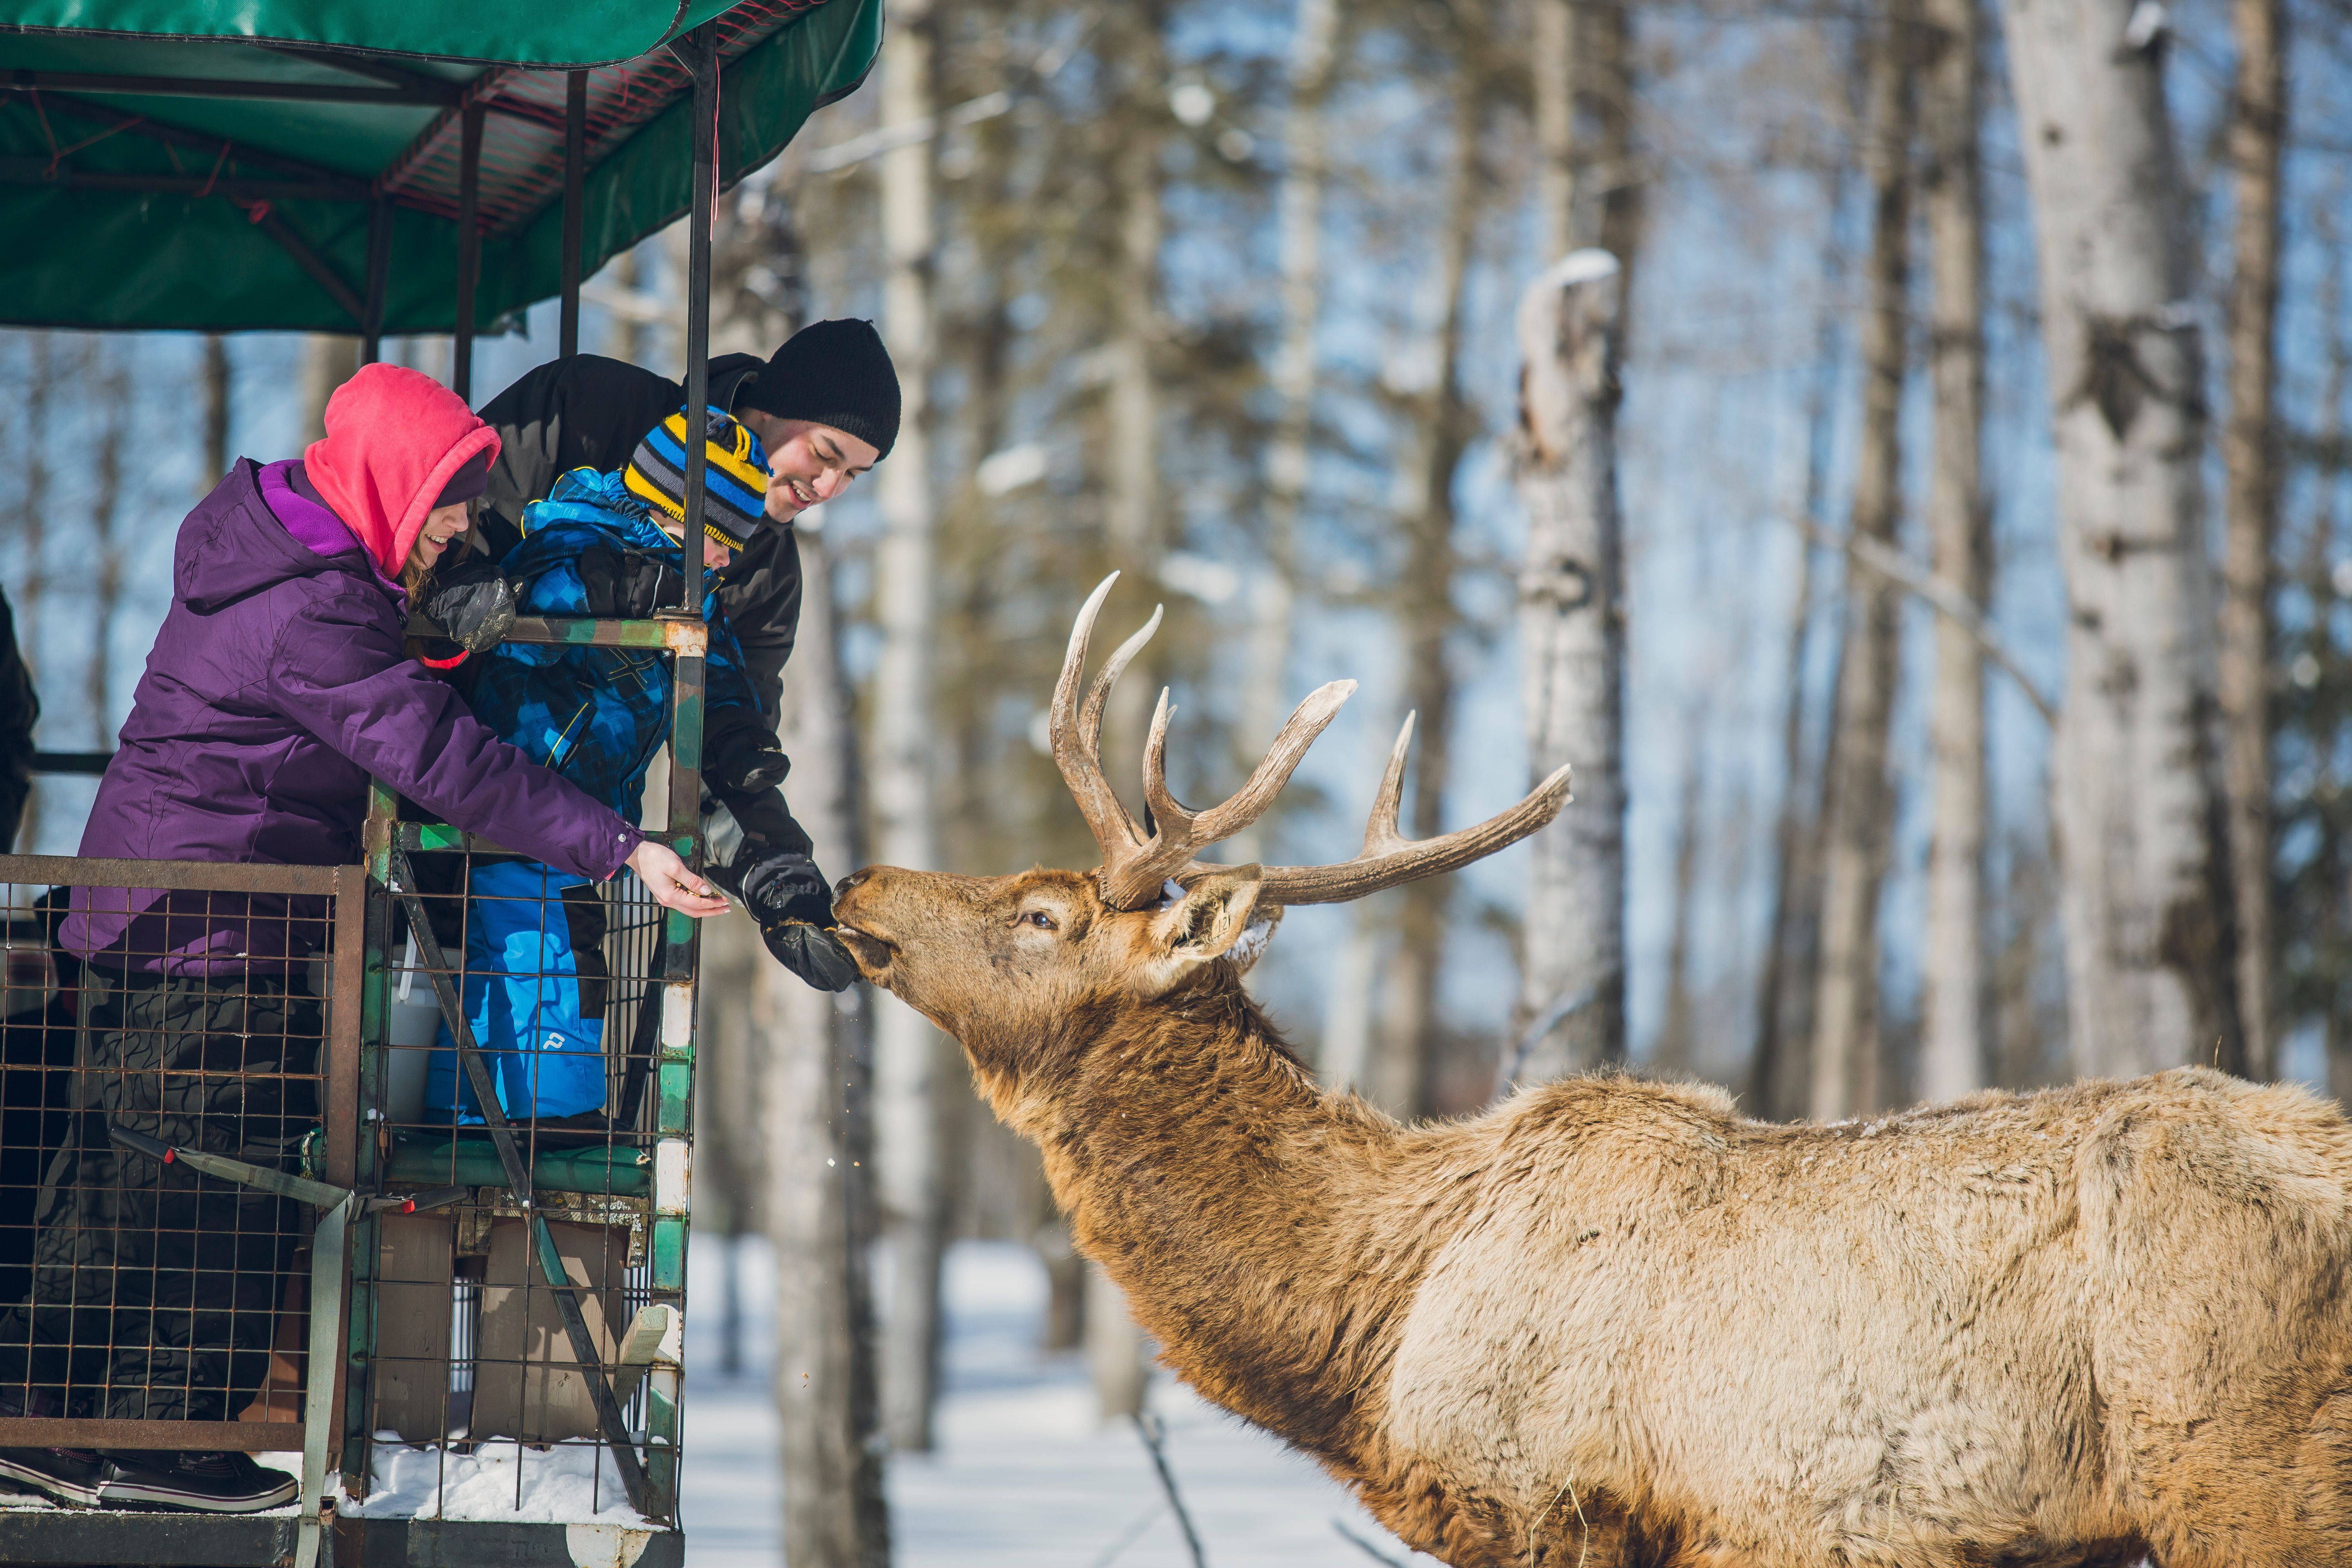 two adults and a small child in outdoor winter clothing smile as they reach over a fence to feed an elk with their hands. There is snowy forest in the background.